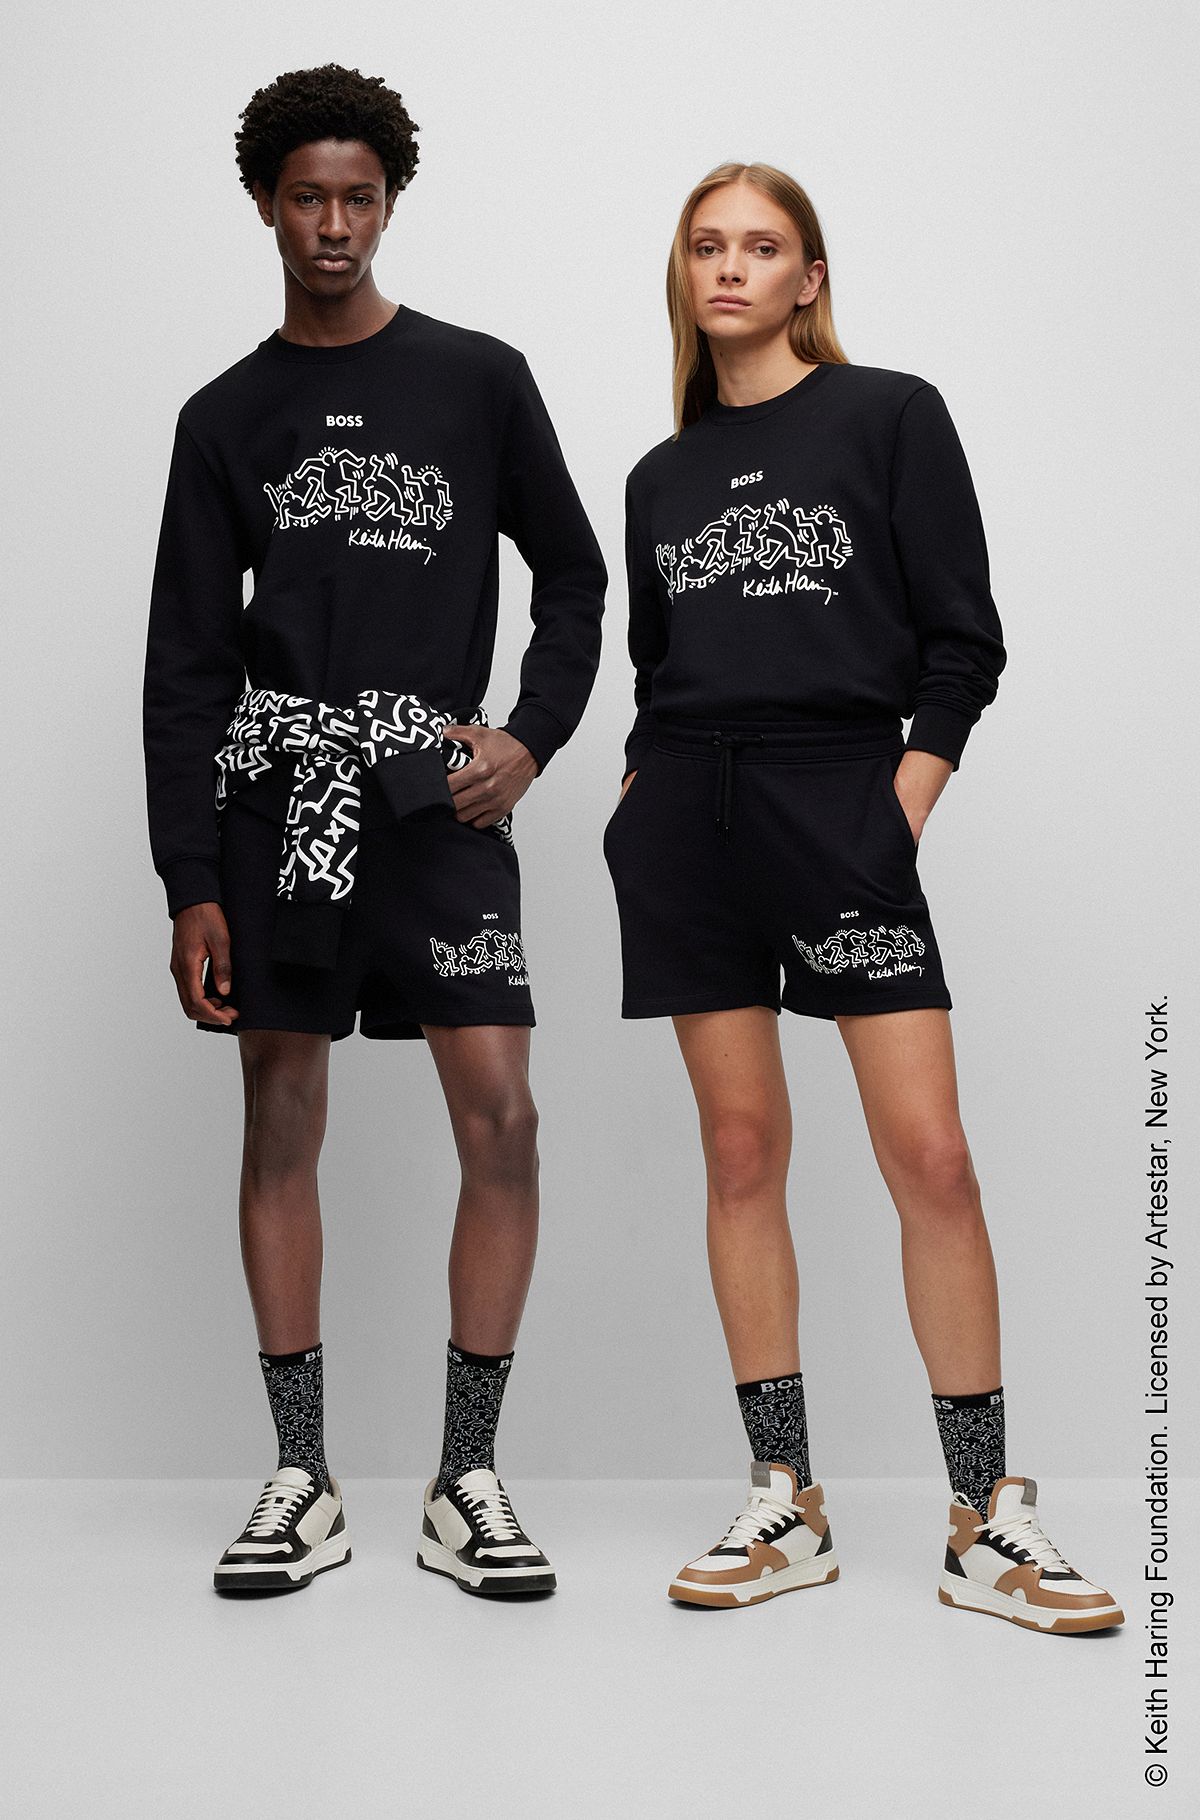 BOSS x Keith Haring gender-neutral cotton-blend sweatshirt with special artwork, Black